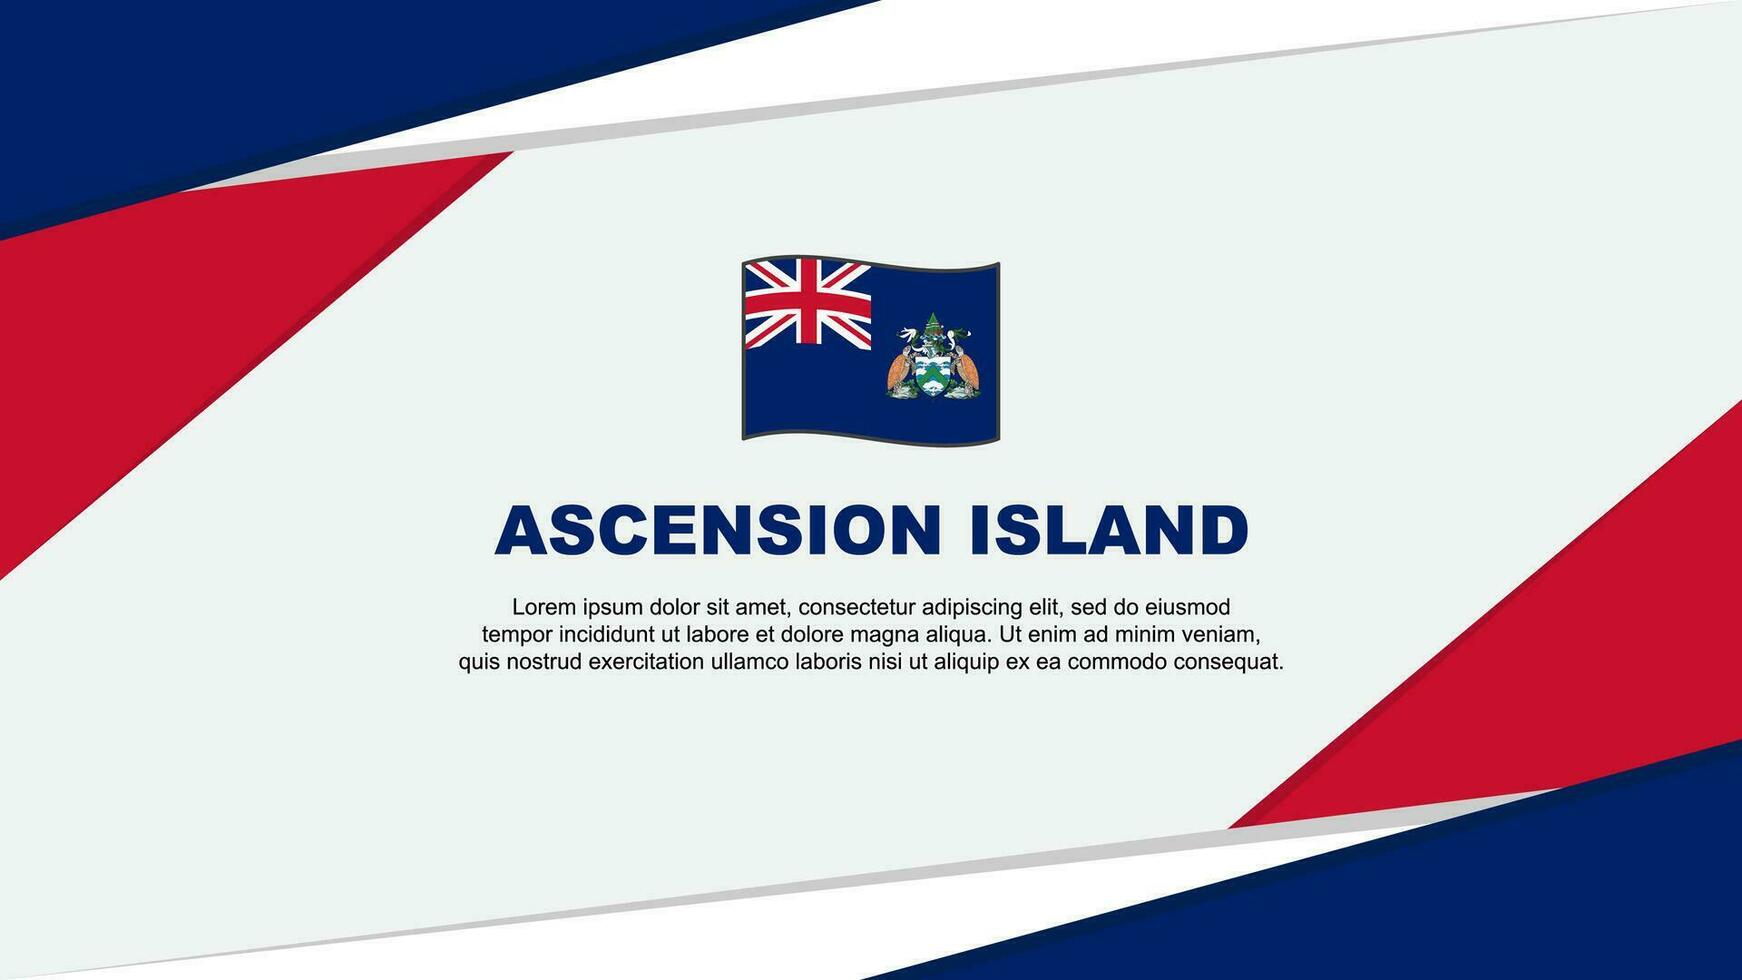 Ascension Island Flag Abstract Background Design Template. Ascension Island Independence Day Banner Cartoon Vector Illustration. Ascension Island